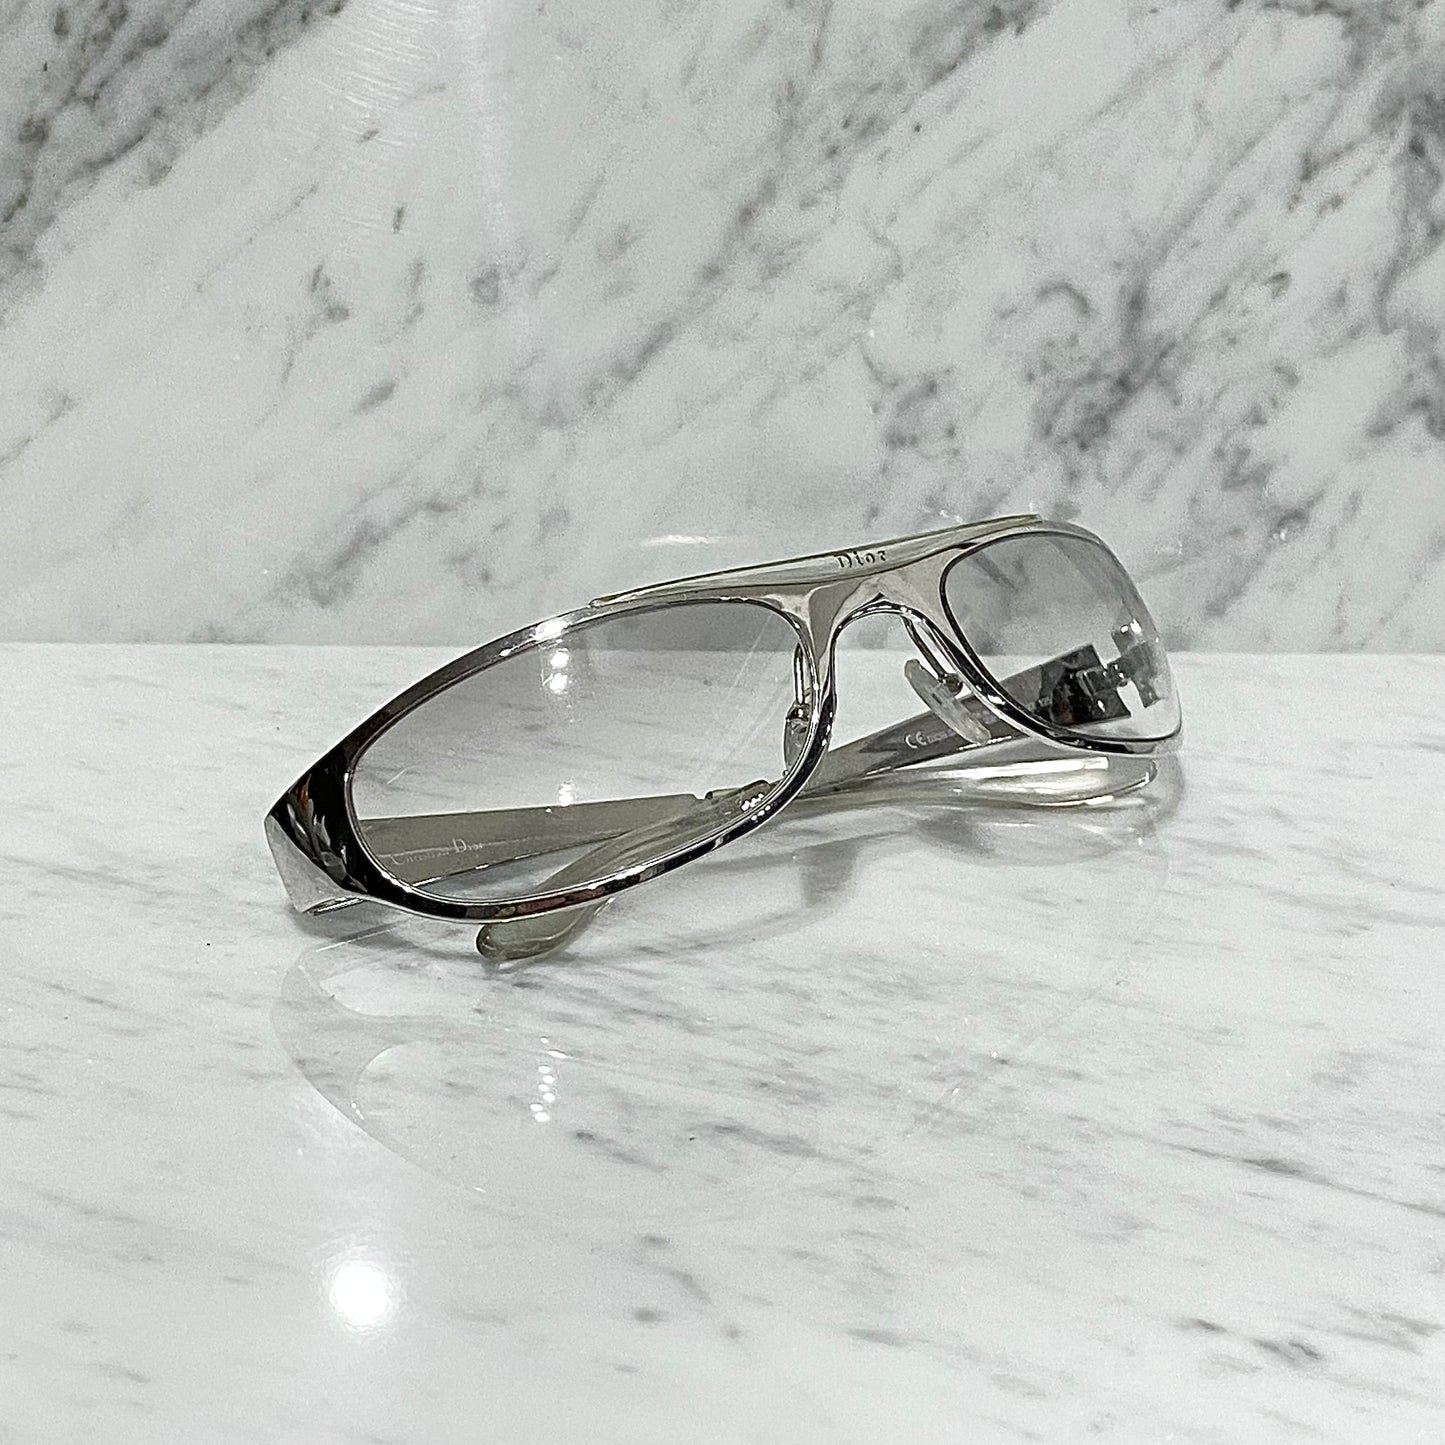 Dior 2000 « Safety » Silver Clear Gradient Sunglasses